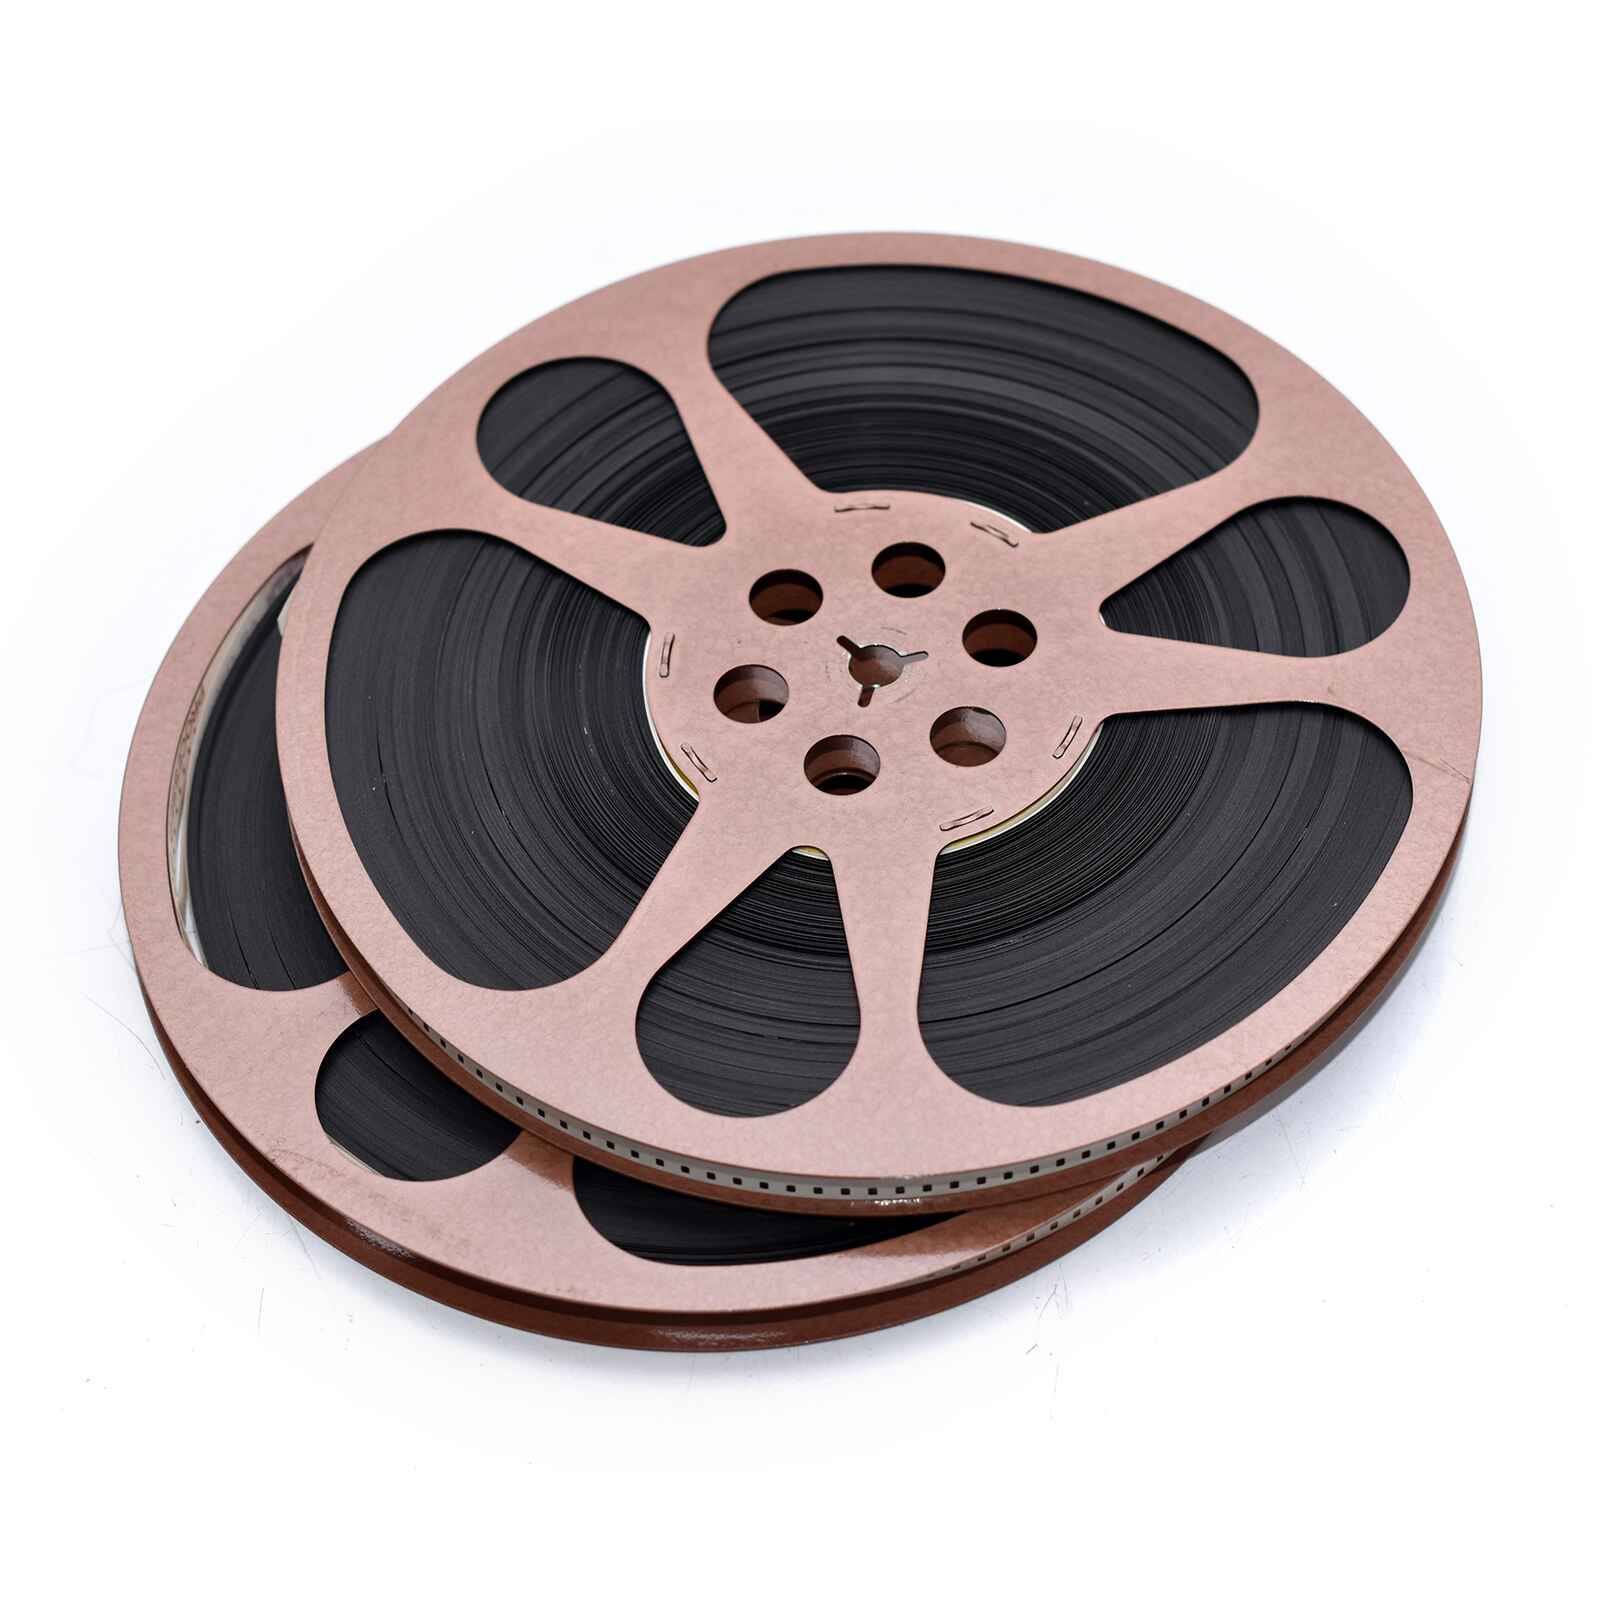 Convert 8mm and 16mm Movie Film to Digital .mp4 on USB or DVD.